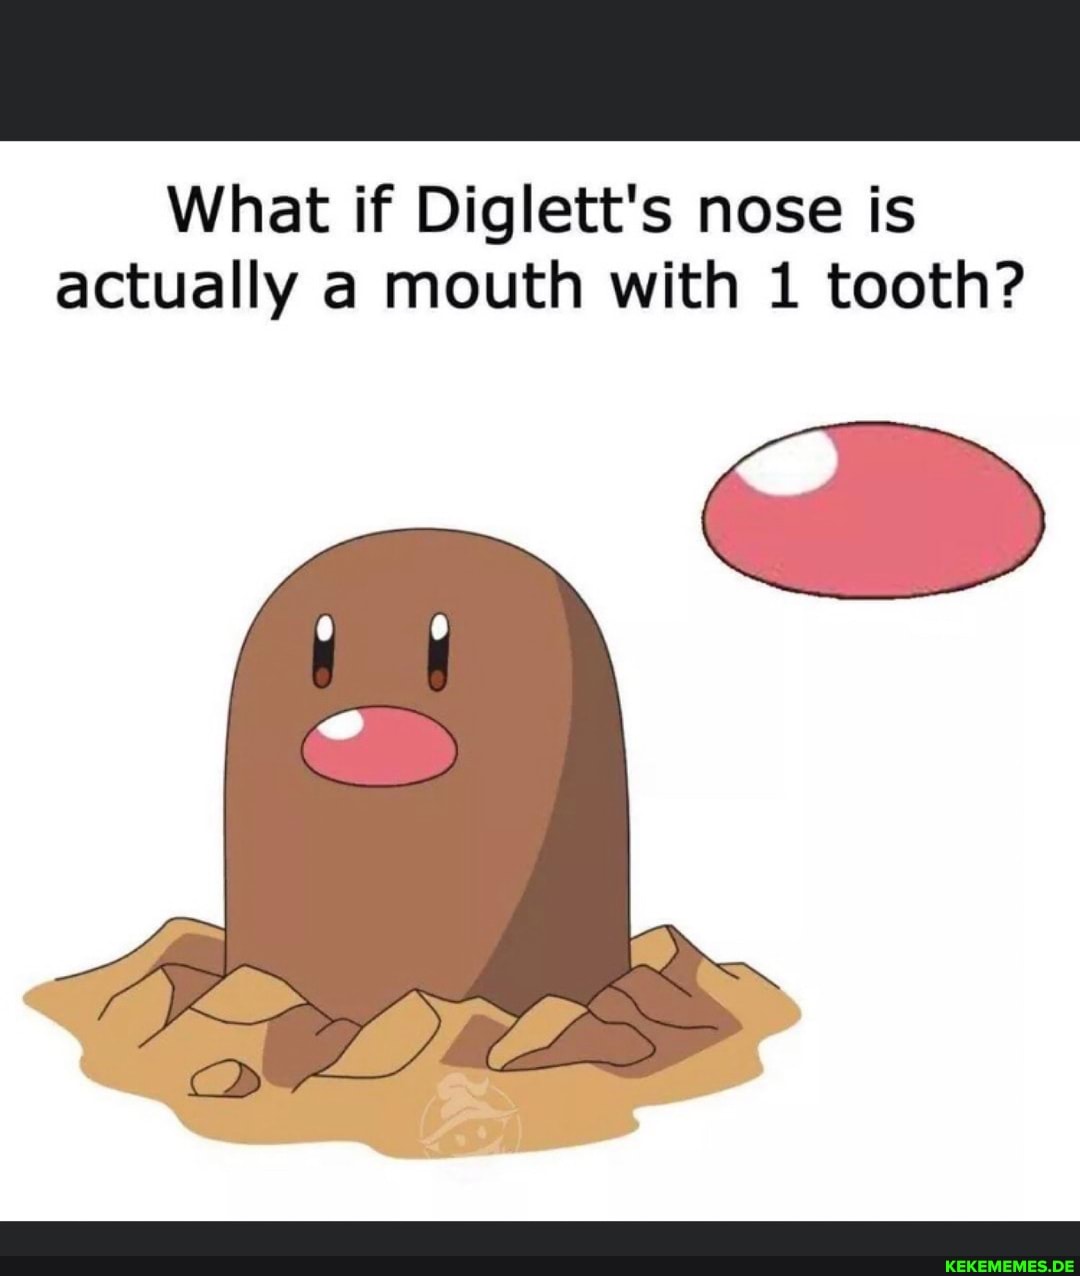 What if Diglett's nose is actually mouth with 1 tooth?